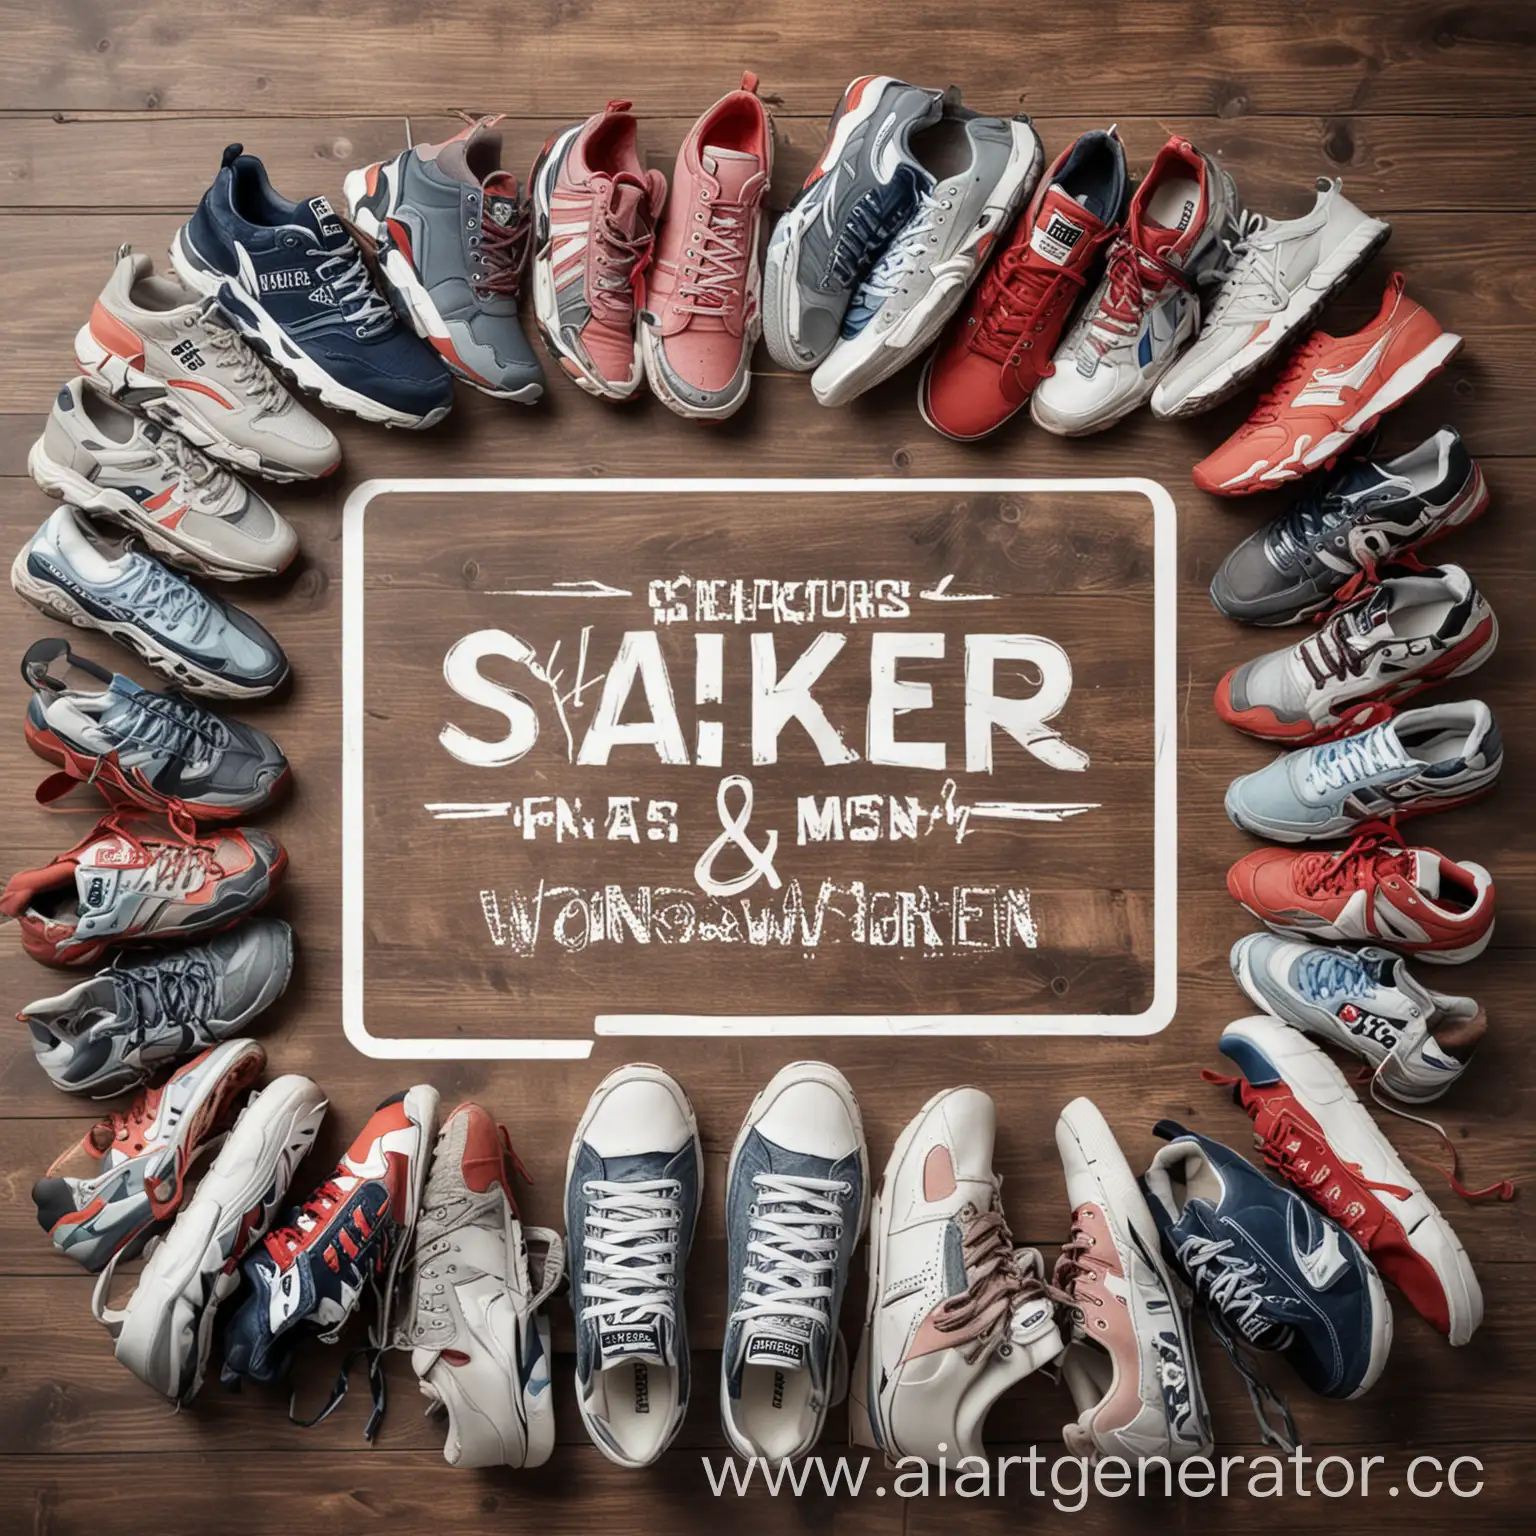 Stylish-Sneakers-for-Men-and-Women-Urban-Background-with-Striking-Typography